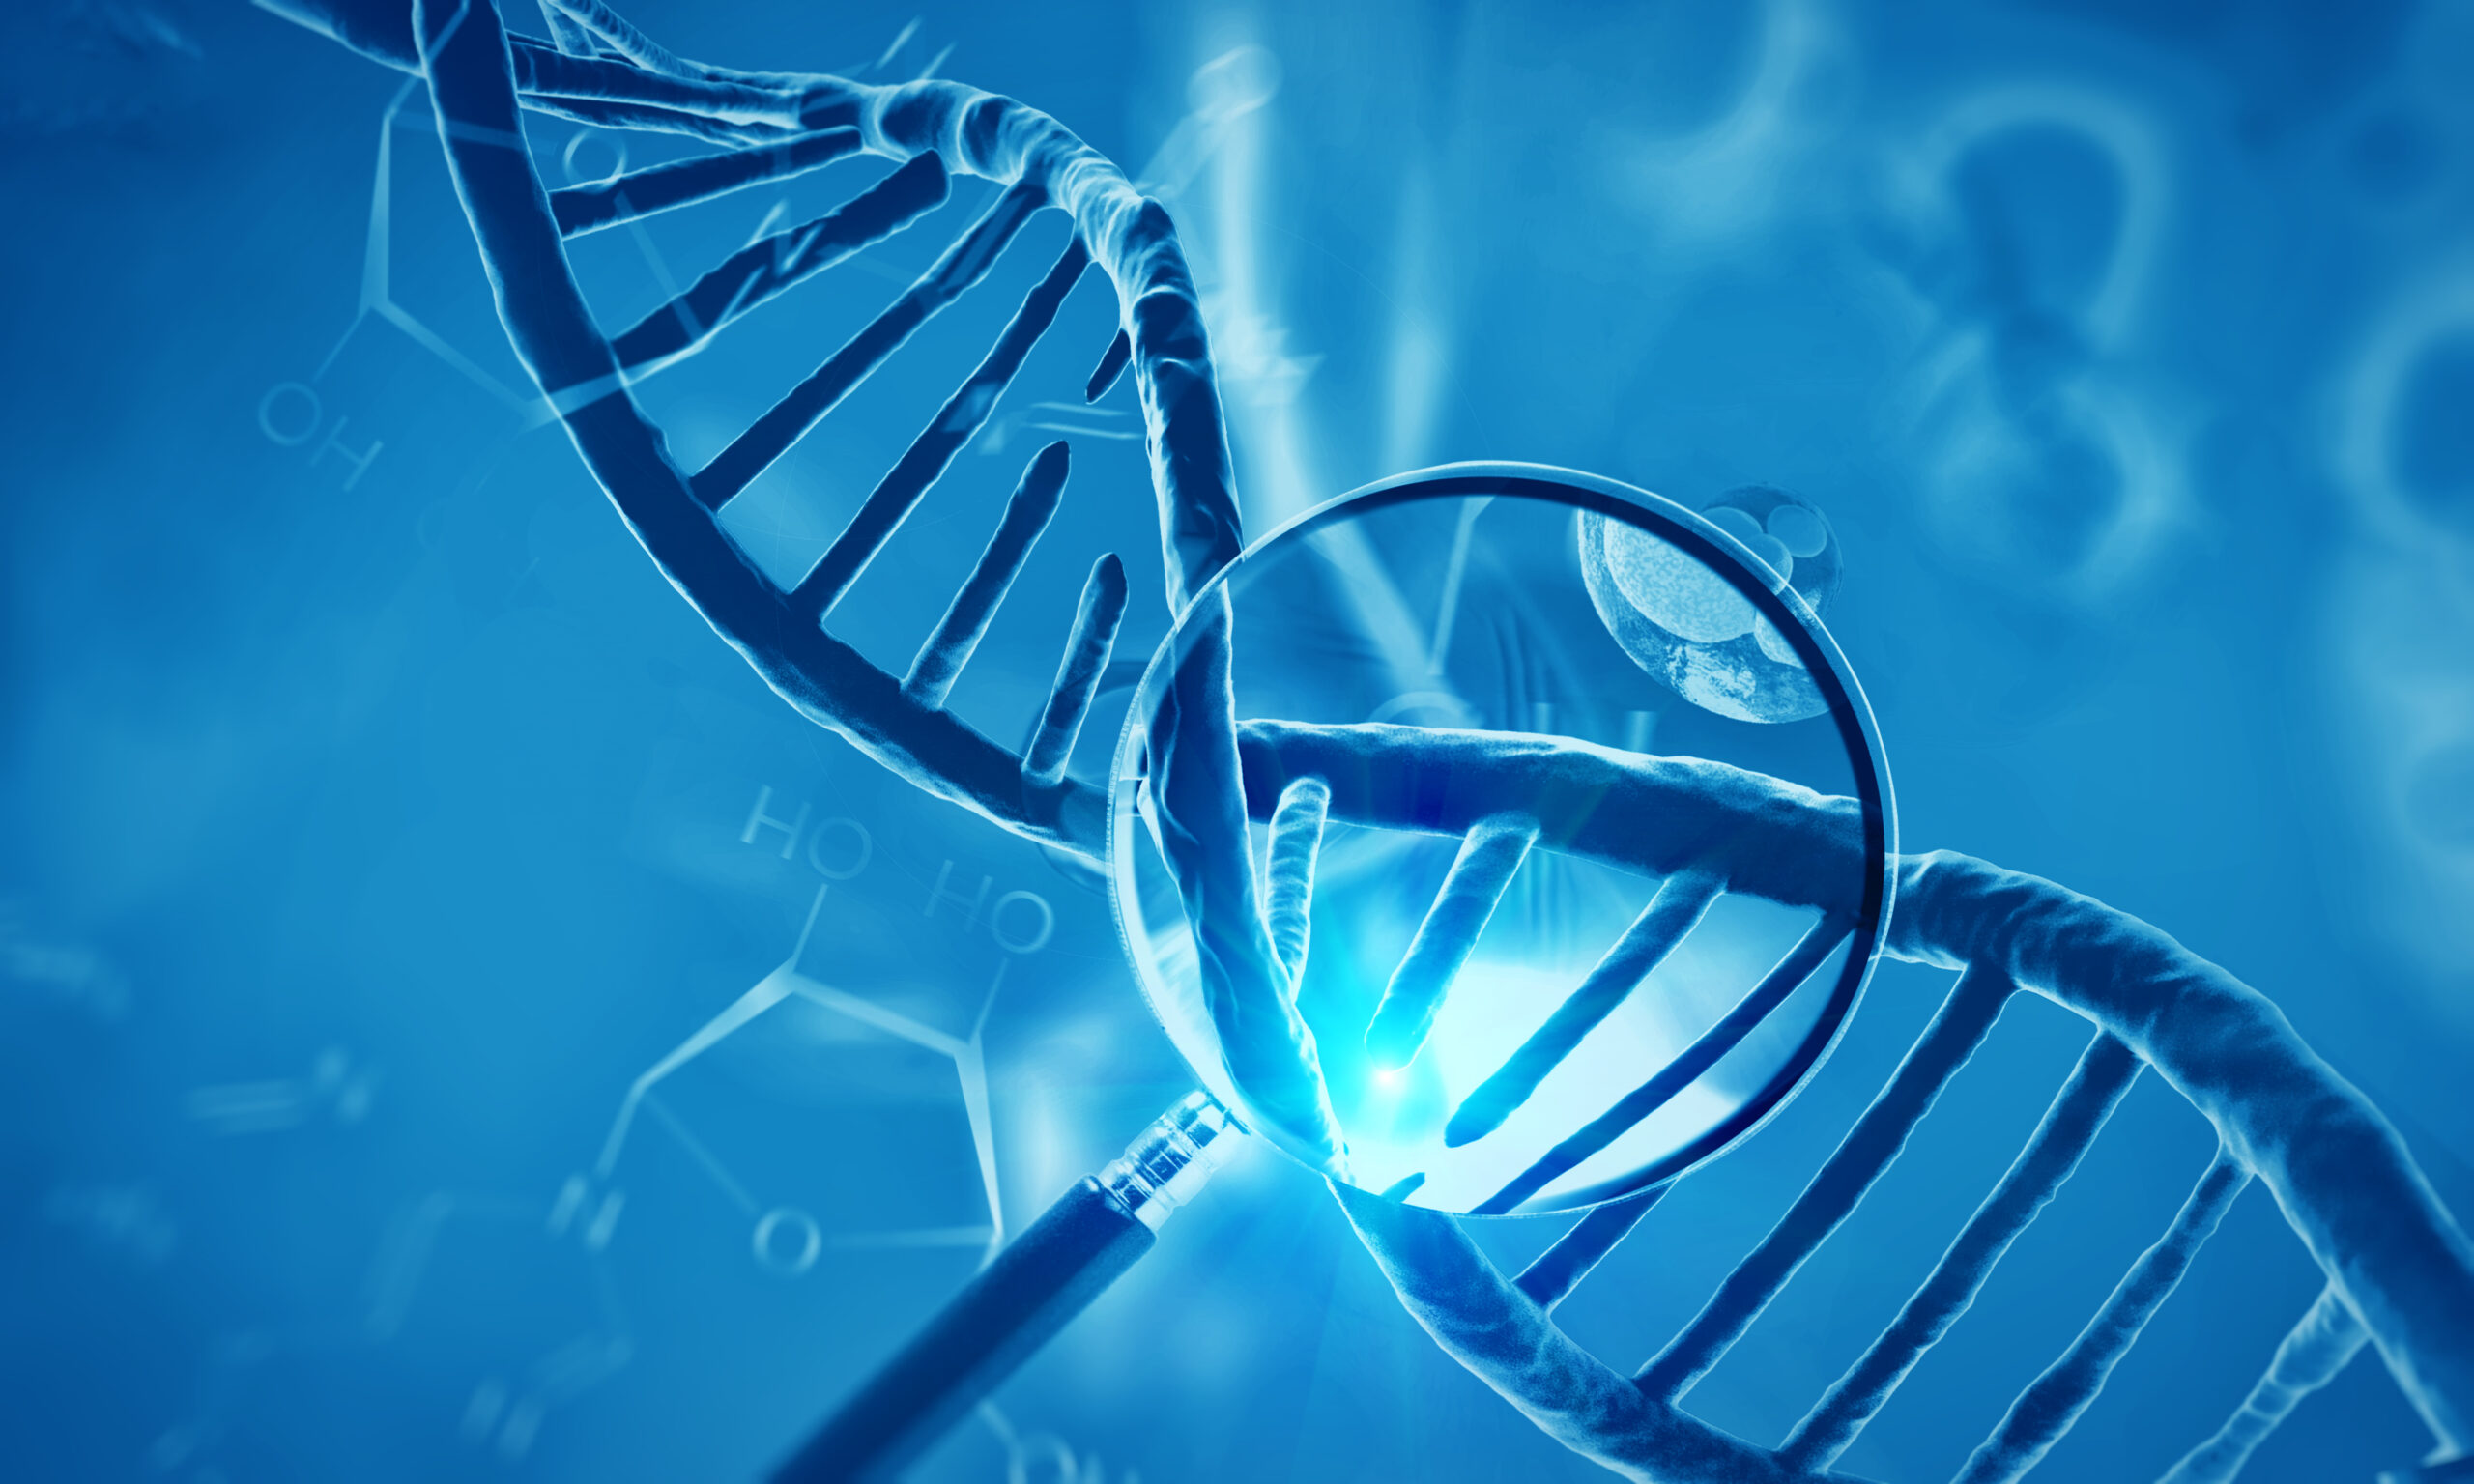 3d render of dna structure and cells, abstract background